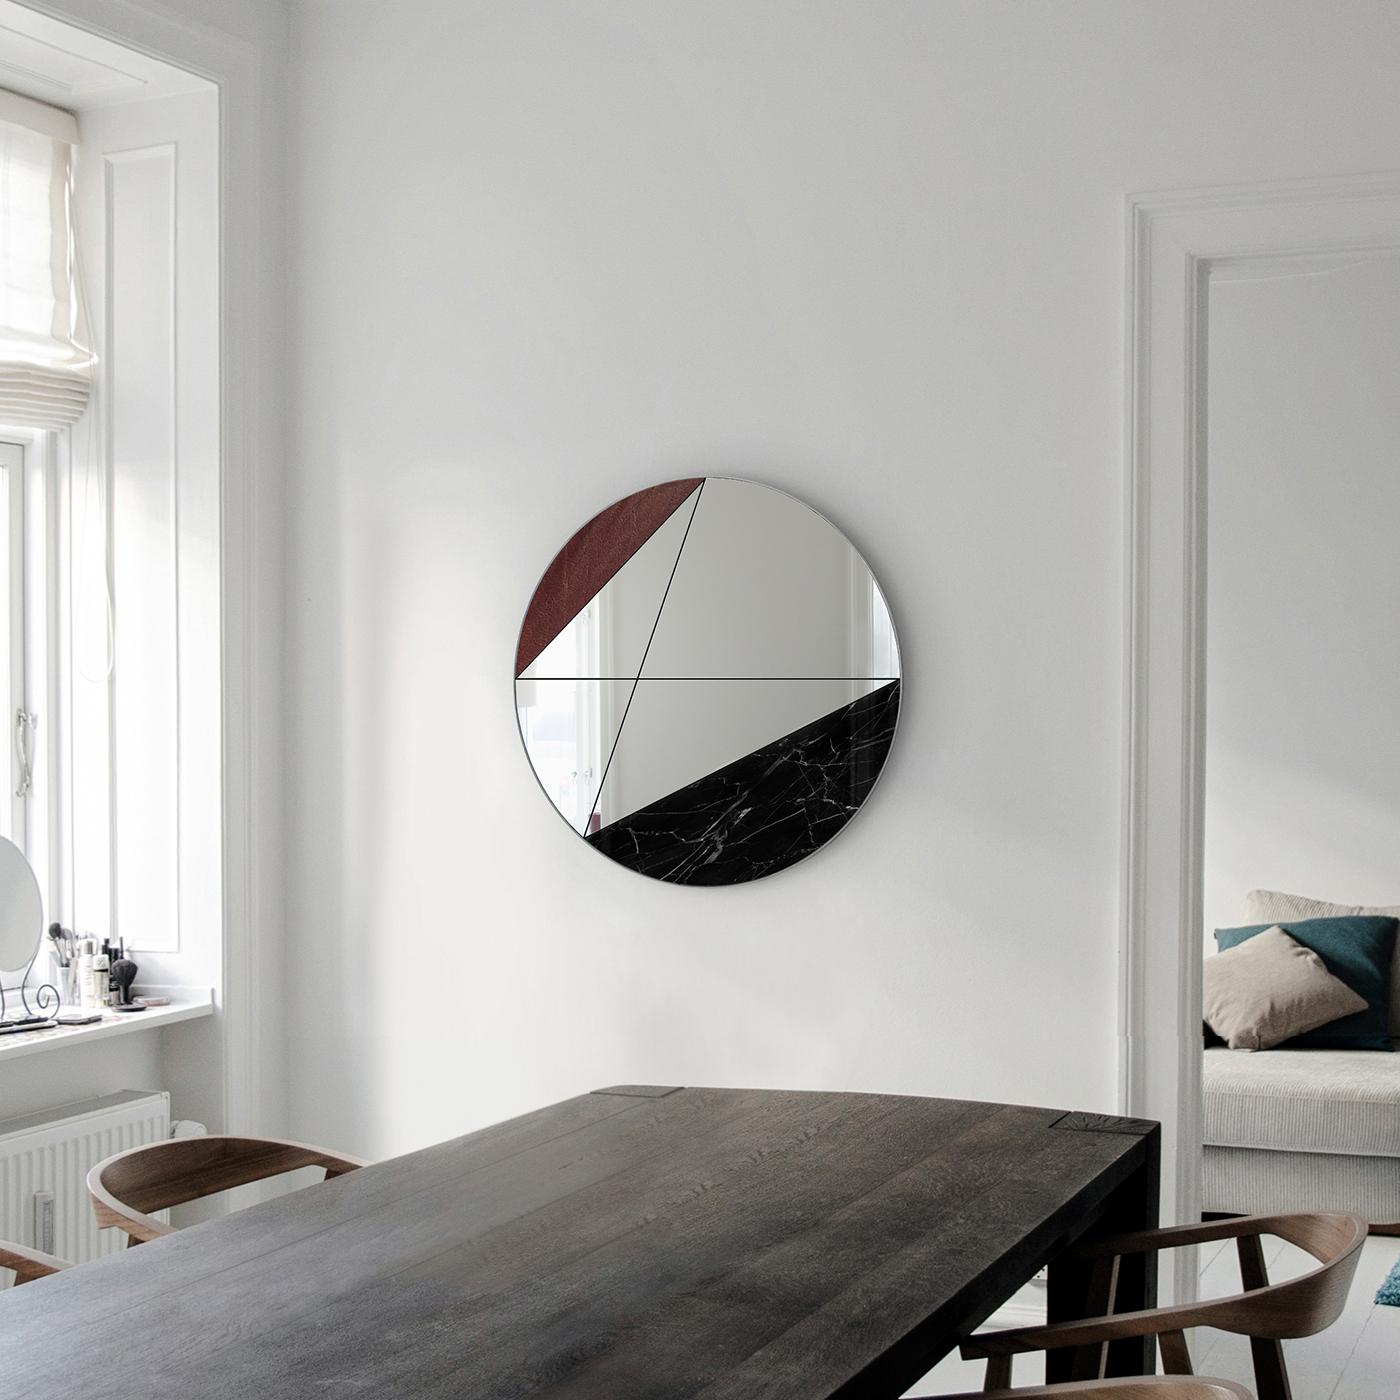 Made by hand exclusively in natural materials, no two clepsydra mirrors are exactly alike. This version, featuring brown leather and Marquinia marble, combines warm and cold tones to perfection, joining them together with the collection's signature